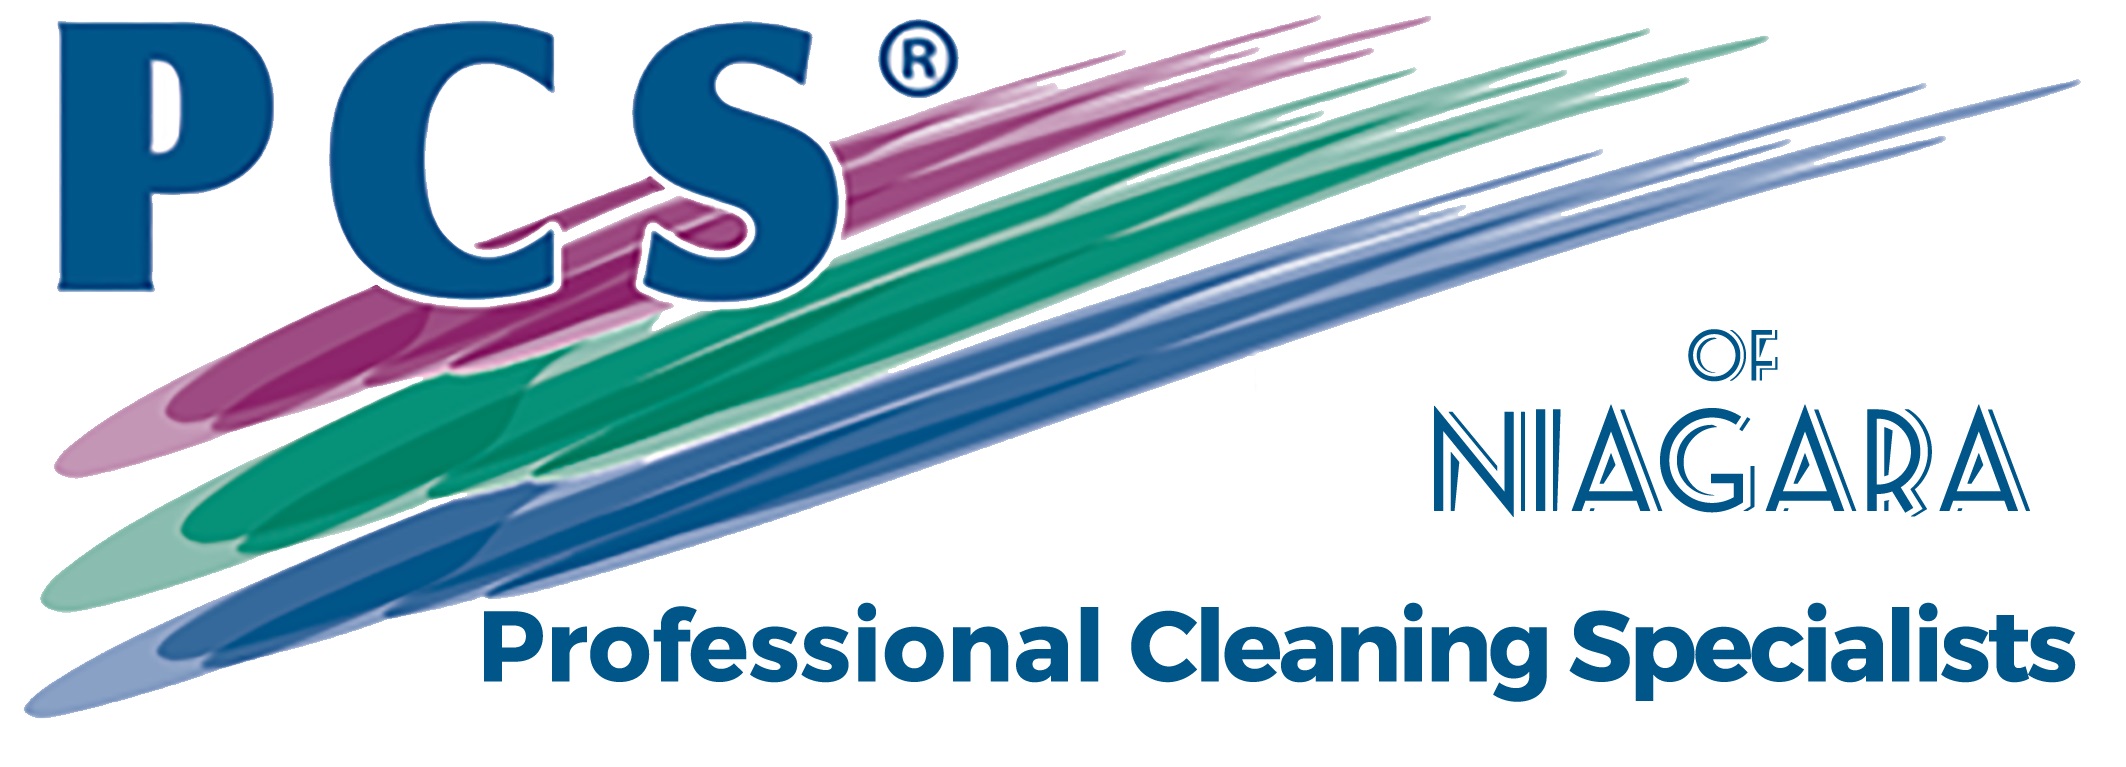 Professional Cleaning Specialists